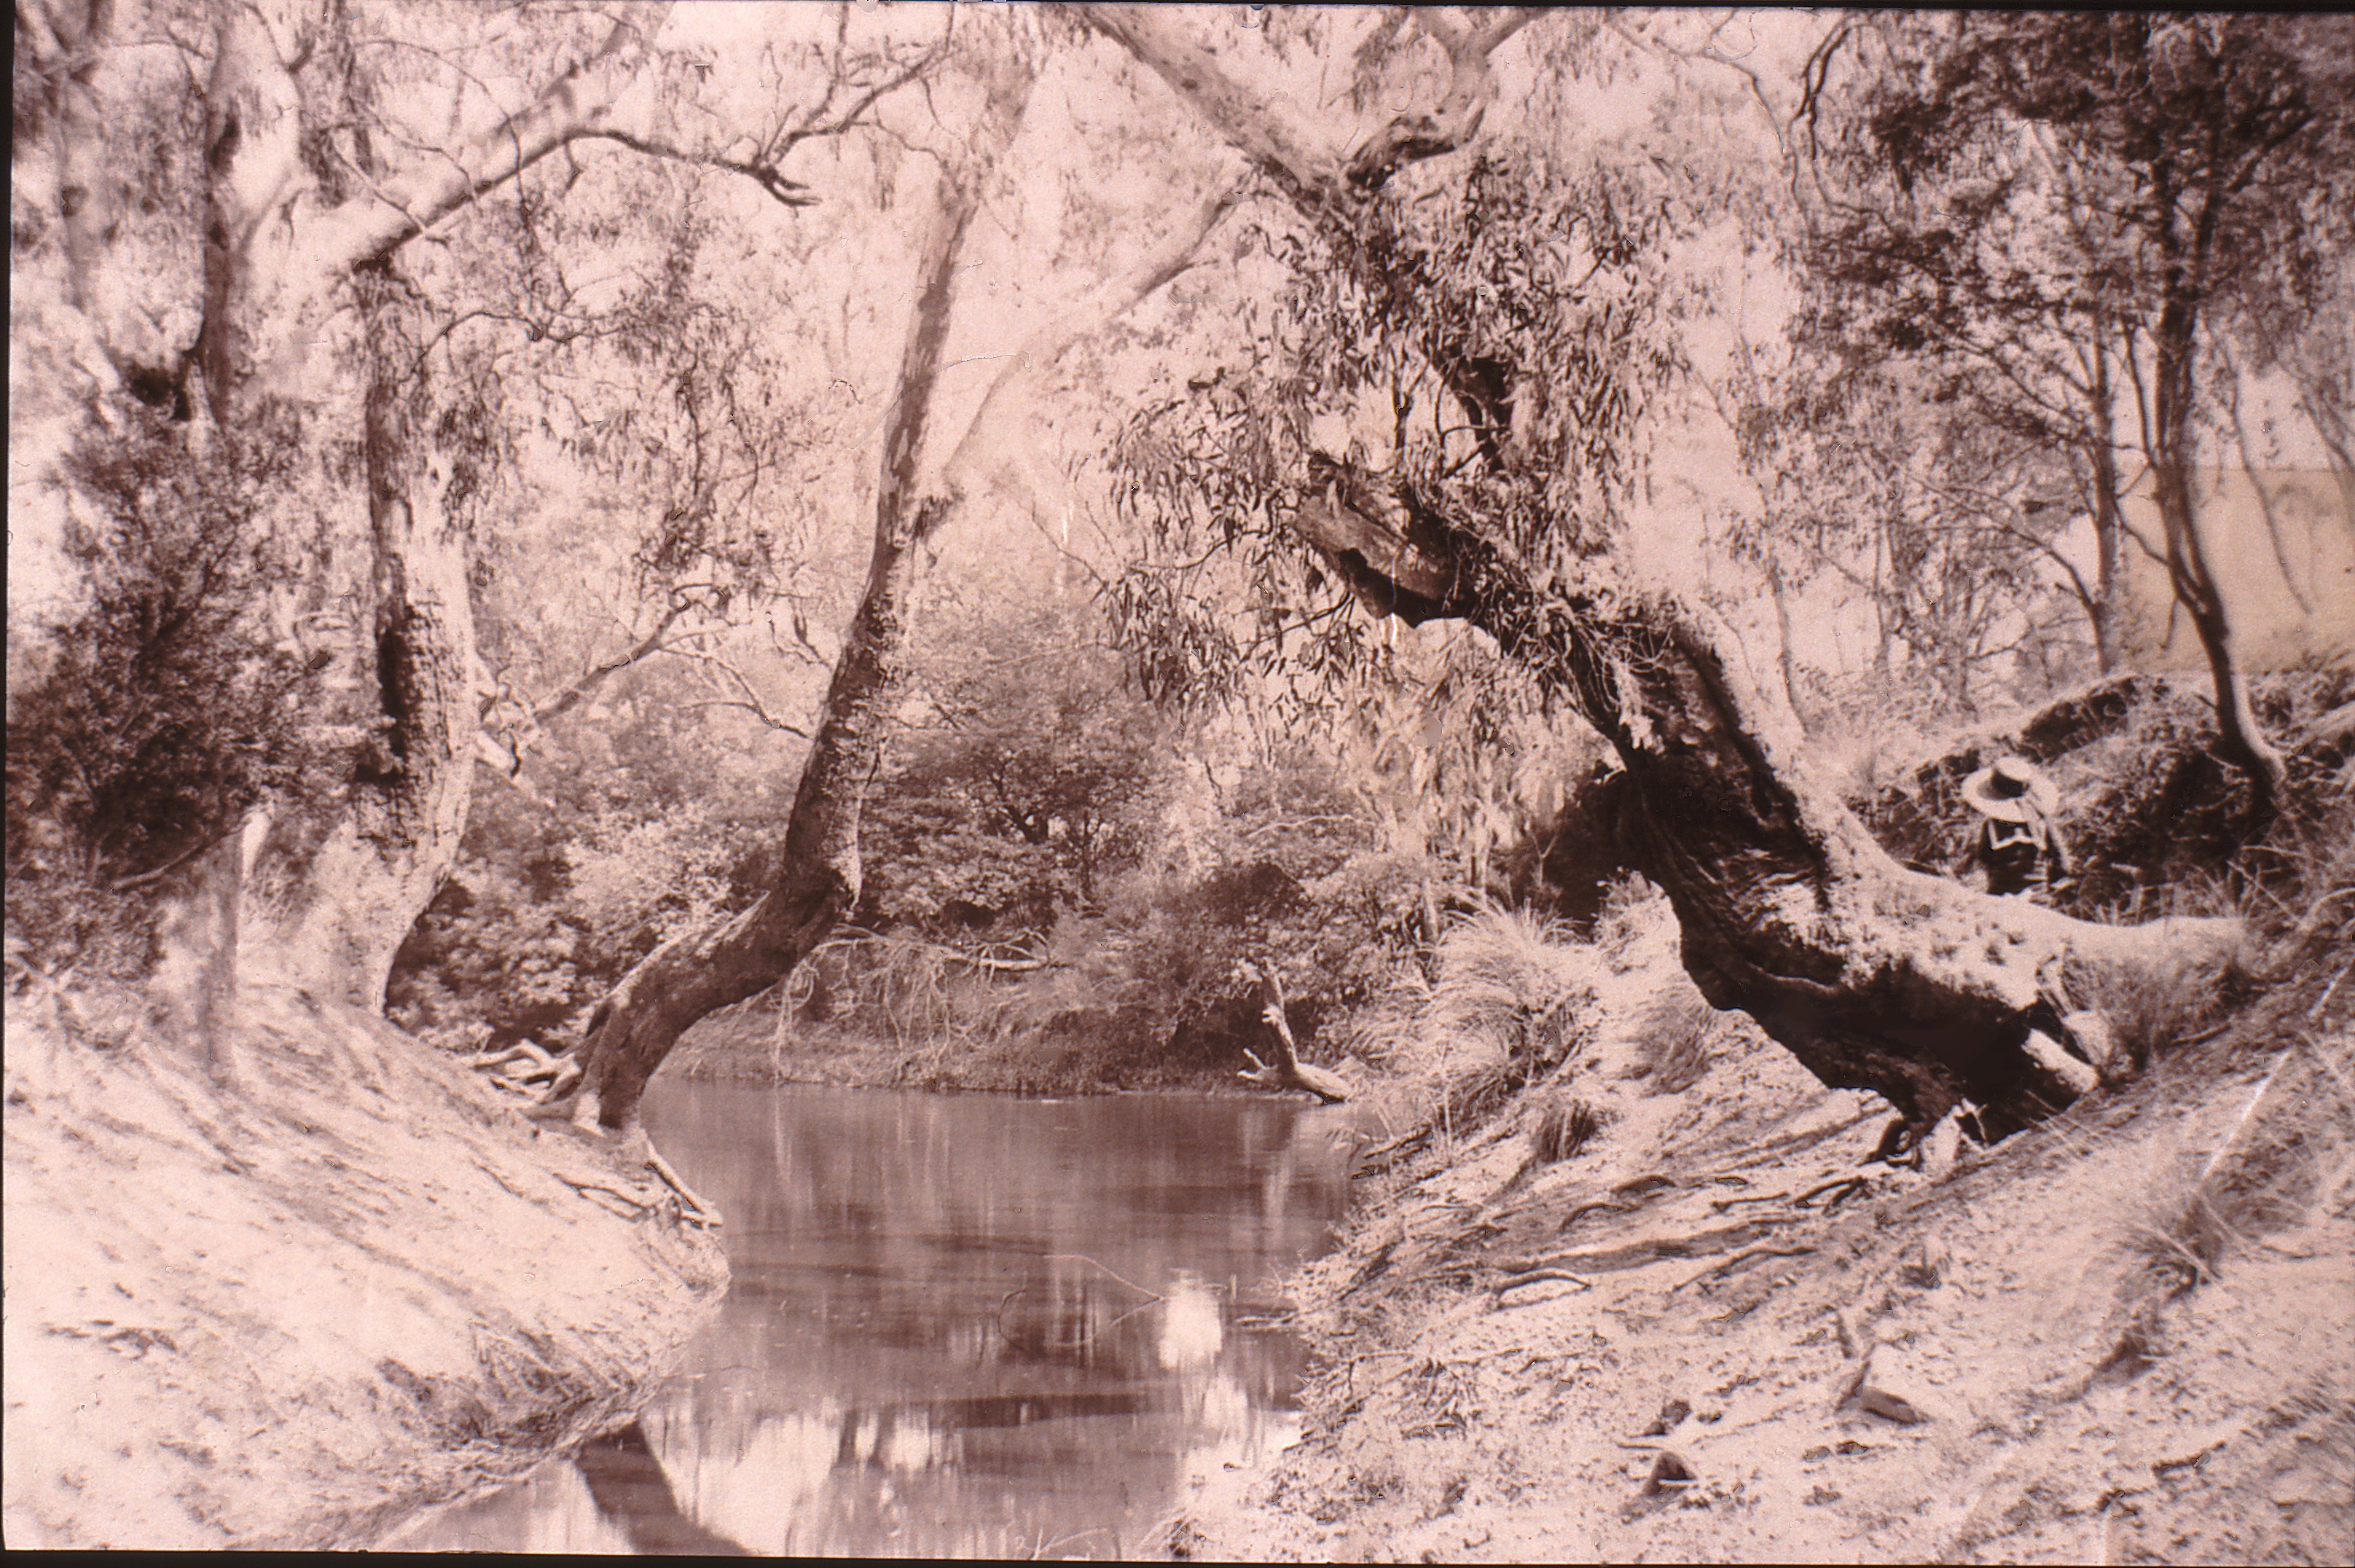 Image of creek bed and trees